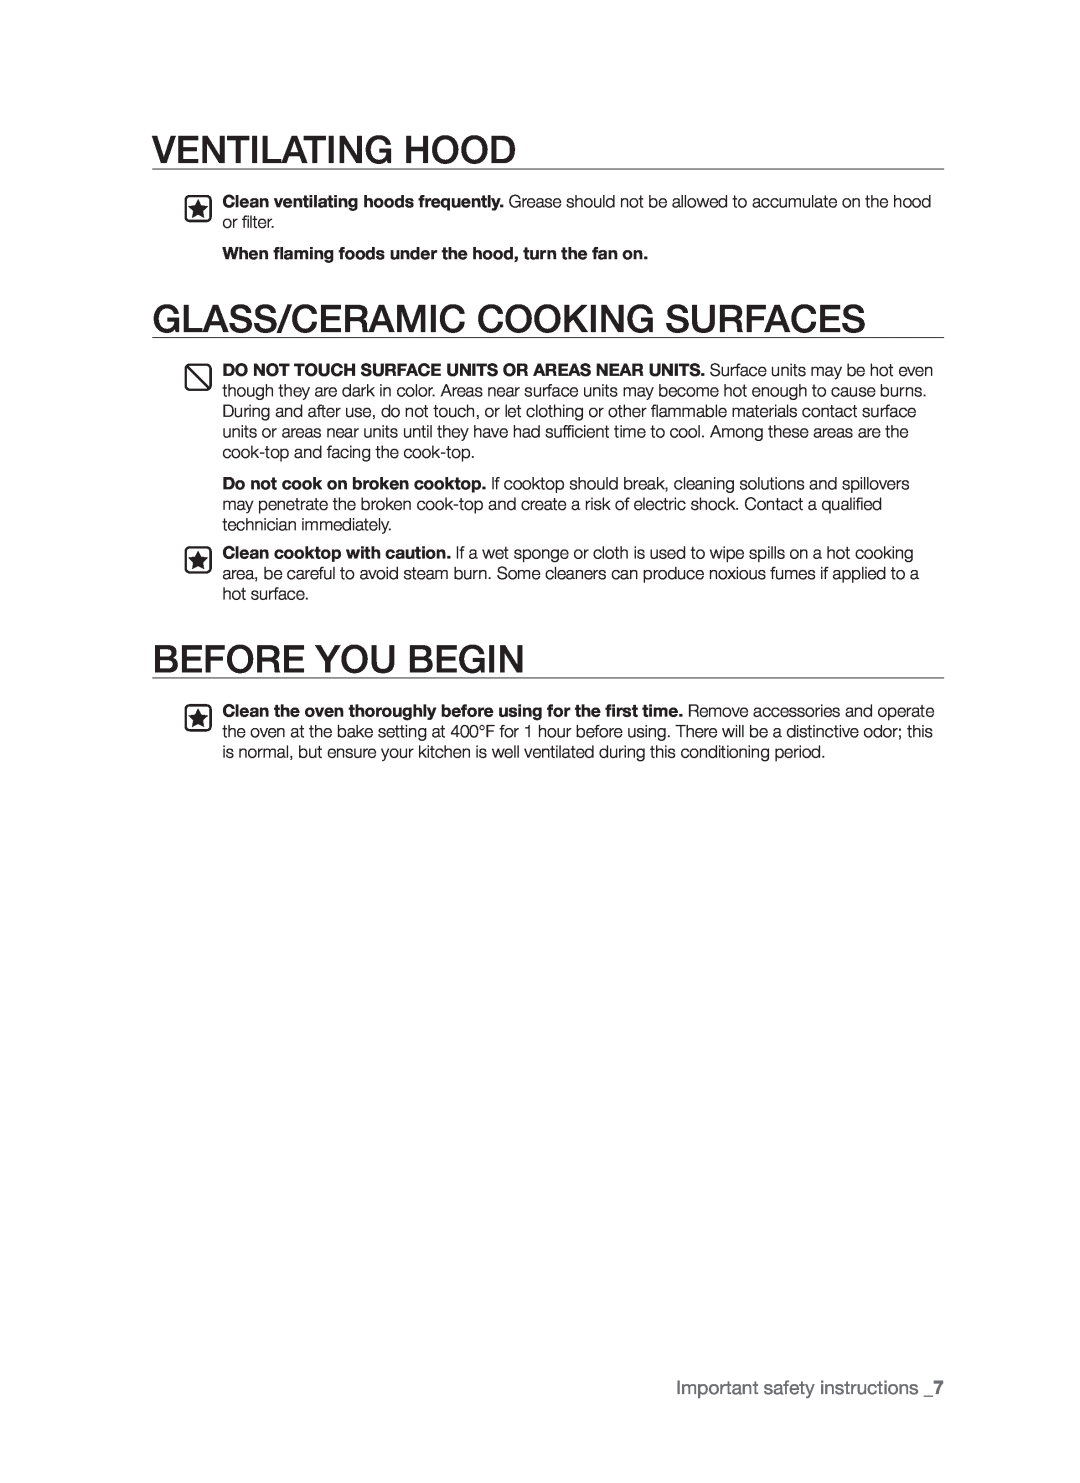 Samsung FCQ321HTUB Ventilating Hood, Glass/Ceramic Cooking Surfaces, before you begin, Important safety instructions  